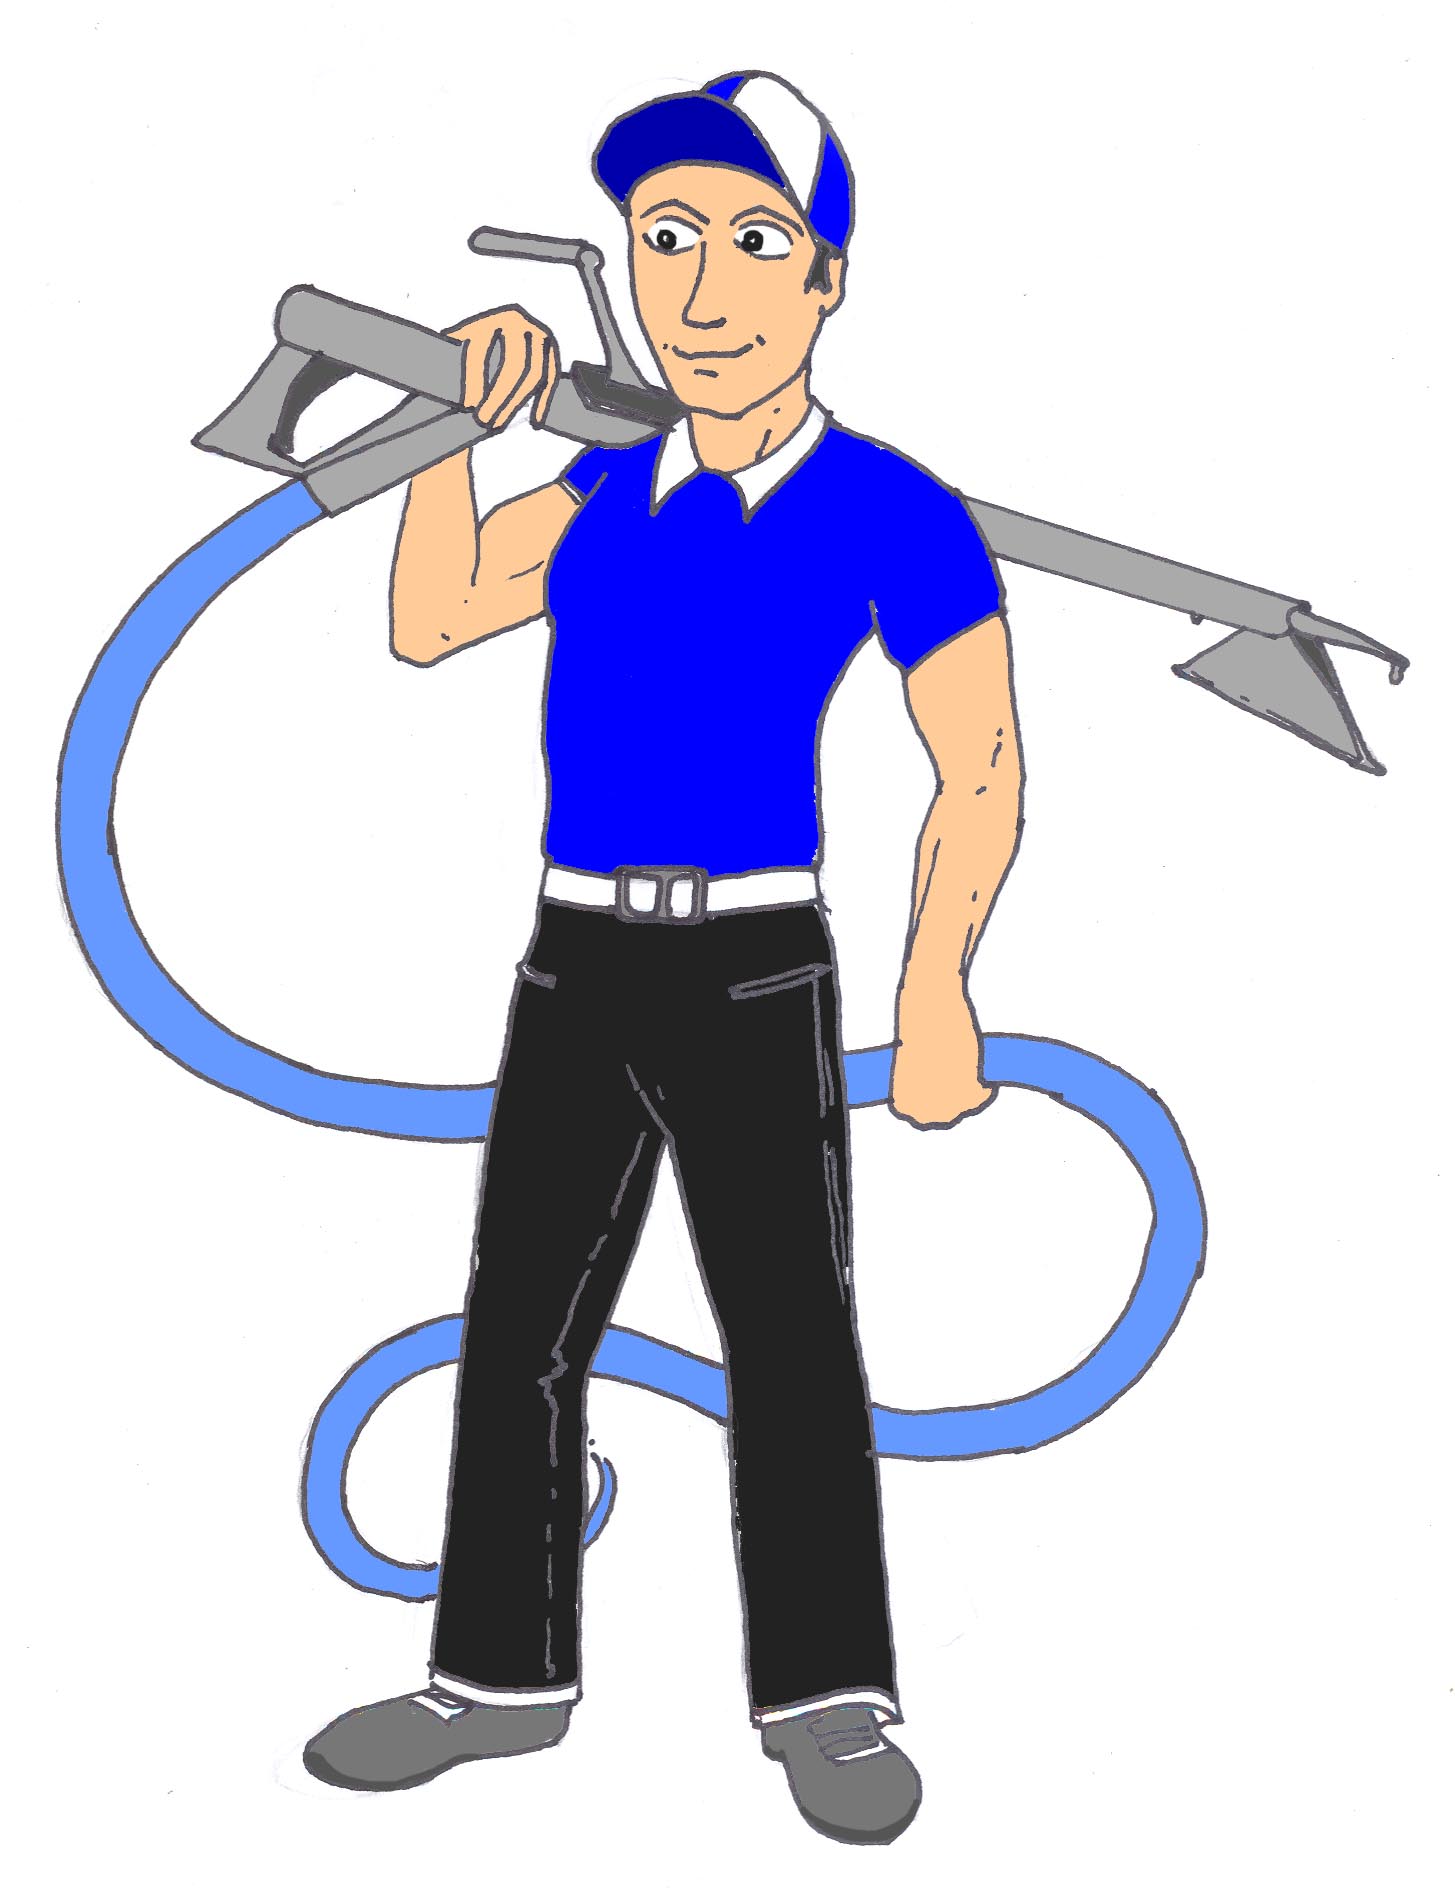 Clip art for carpet cleaning - Steam carpet cleaner clipart ...